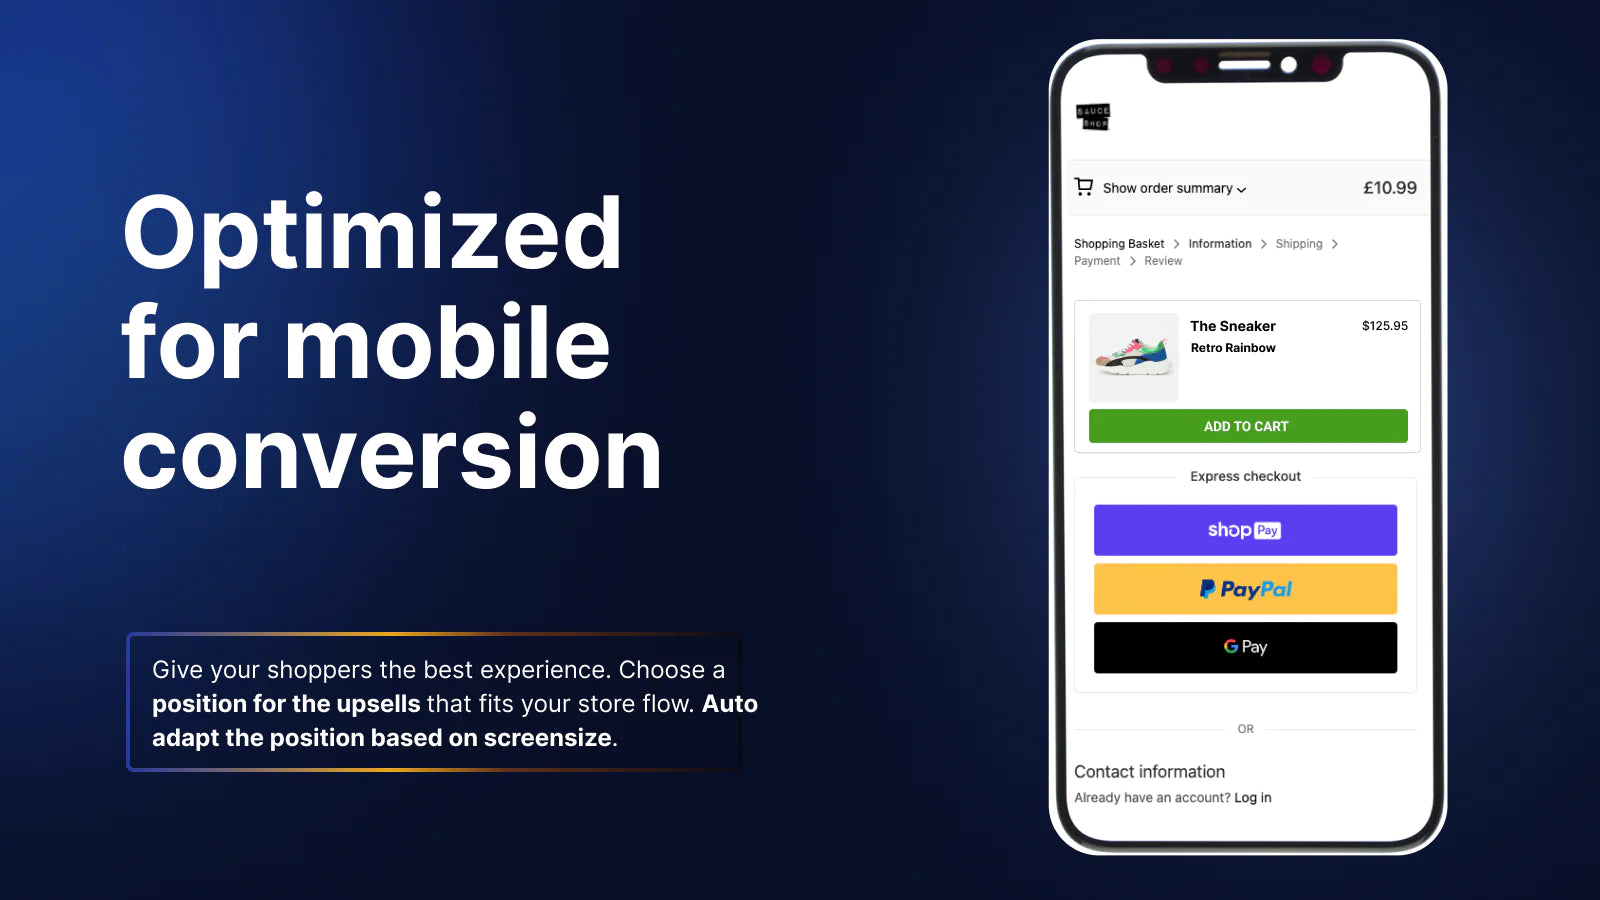 Optimized For Mobile Conversion - Upsell App